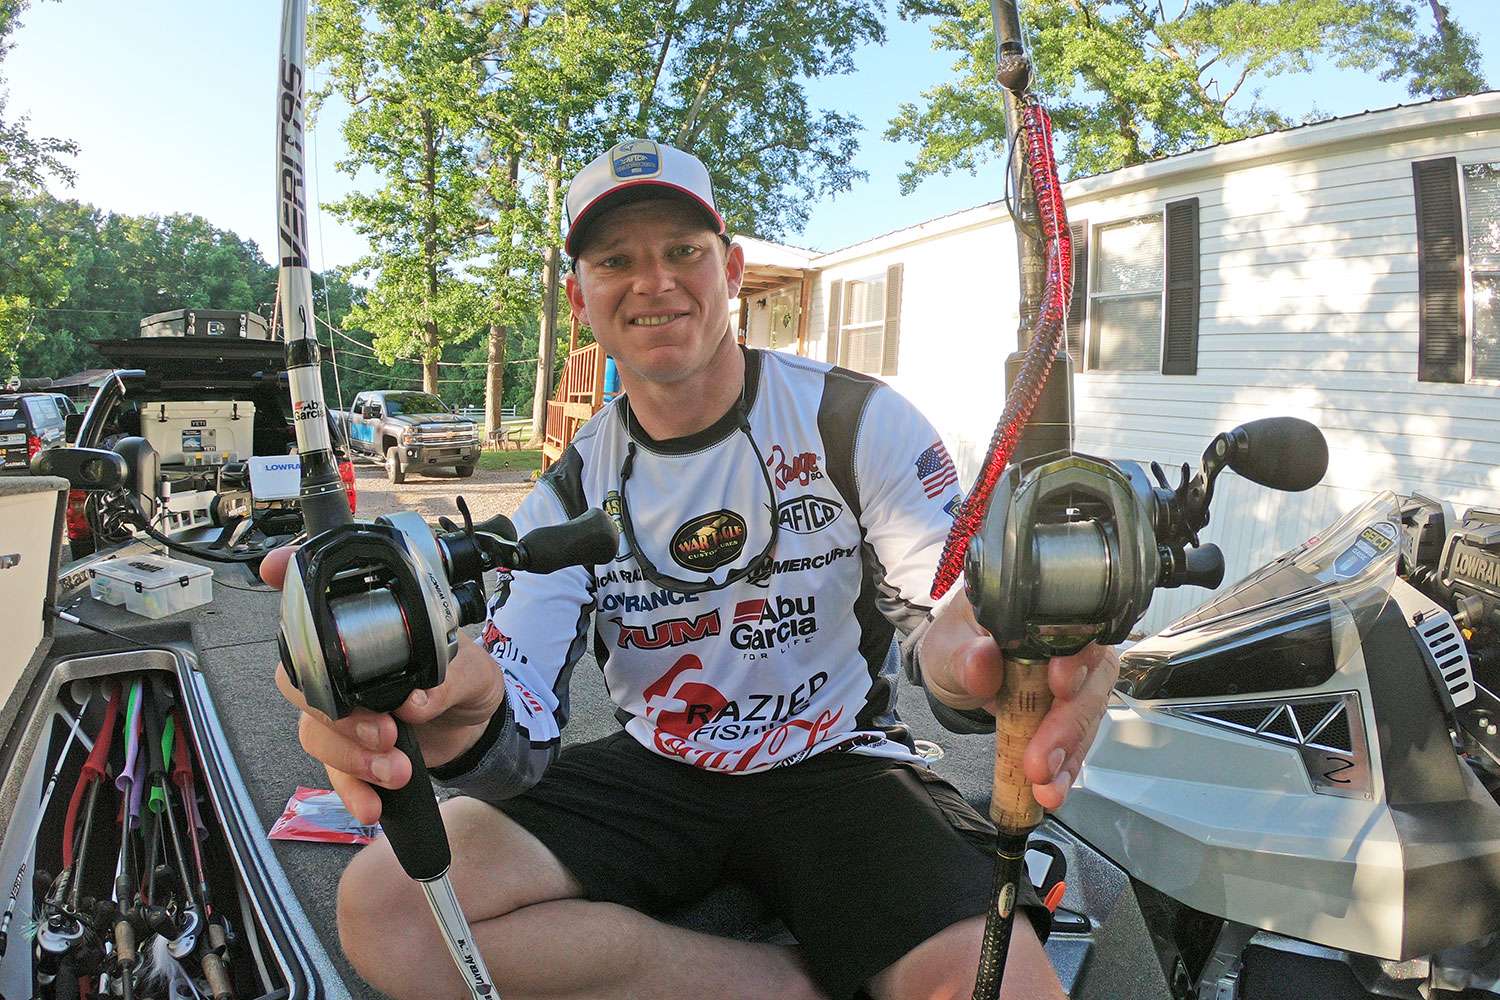 Abu Garcia rods and reels are one of his main sponsors, and that matched with Sunline keep him attached to his fish.